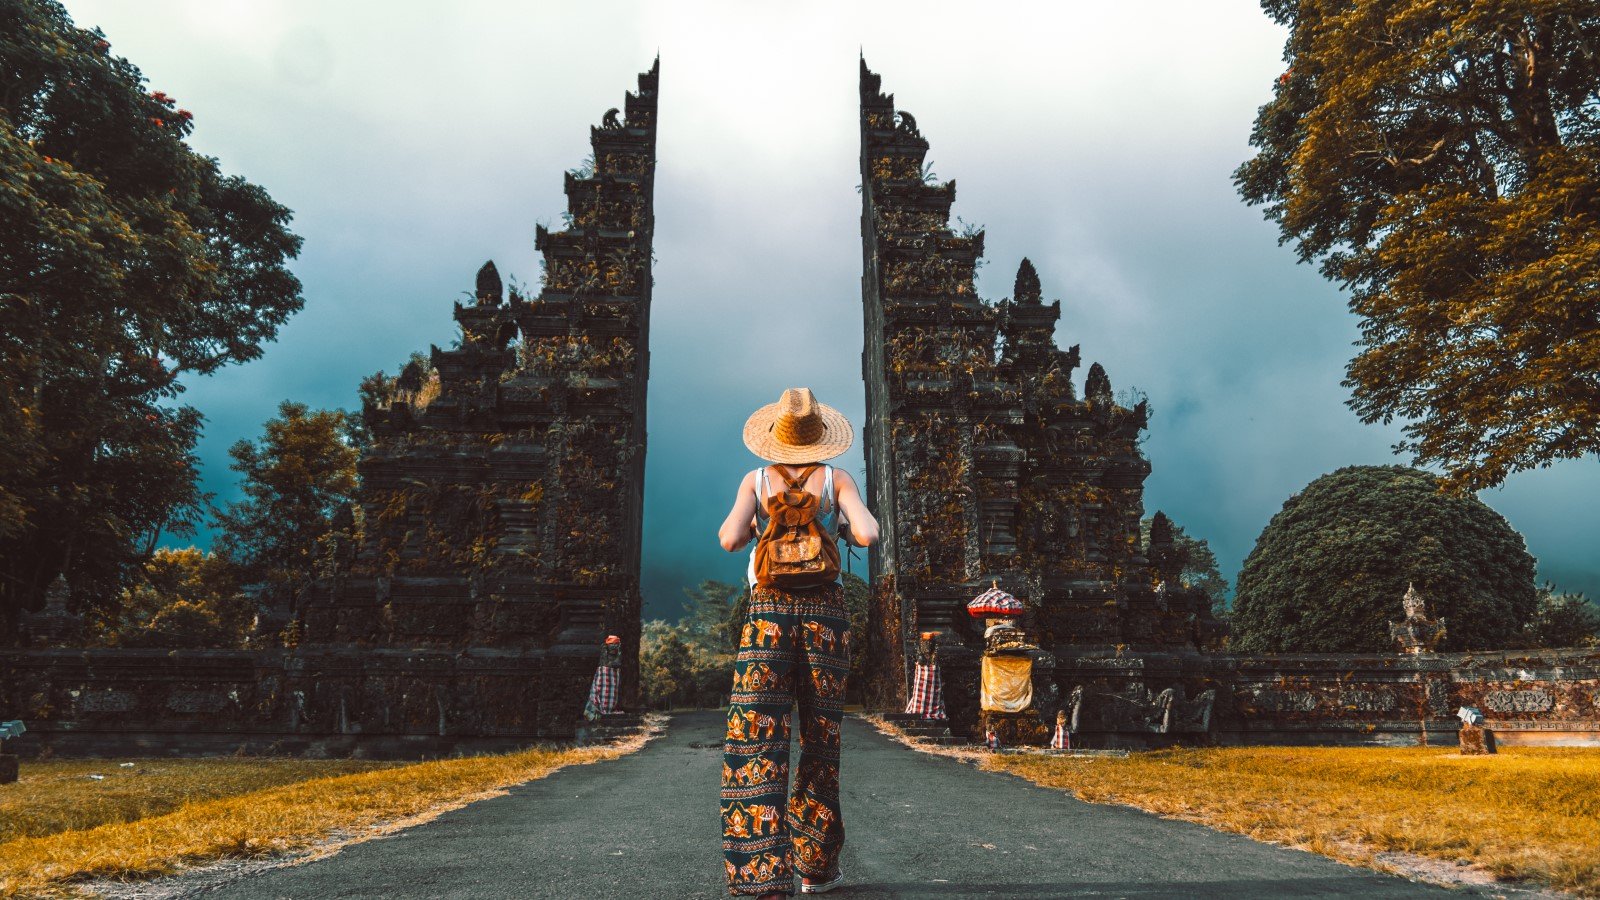 <p><span>In Bali, calm and adventure come together without costing a fortune. Beauty is everywhere, from lush rice terraces to soft sandy beaches and ancient temples hidden in the jungle. You can dive into local culture at colorful festivals or relax in </span><span>places</span><span> like Seminyak, Ubud, and Canggu.</span></p><p><span>Known as the island of the Gods, this destination goes easy on your budget thanks to its low cost of living. Eating at warungs, small local eateries, might only save you a few bucks for a complete and genuine meal. Plus, there are numerous budget-friendly places </span><span>to stay</span><span>, from hostels to traditional </span><span>bungalows</span><span>.</span></p>